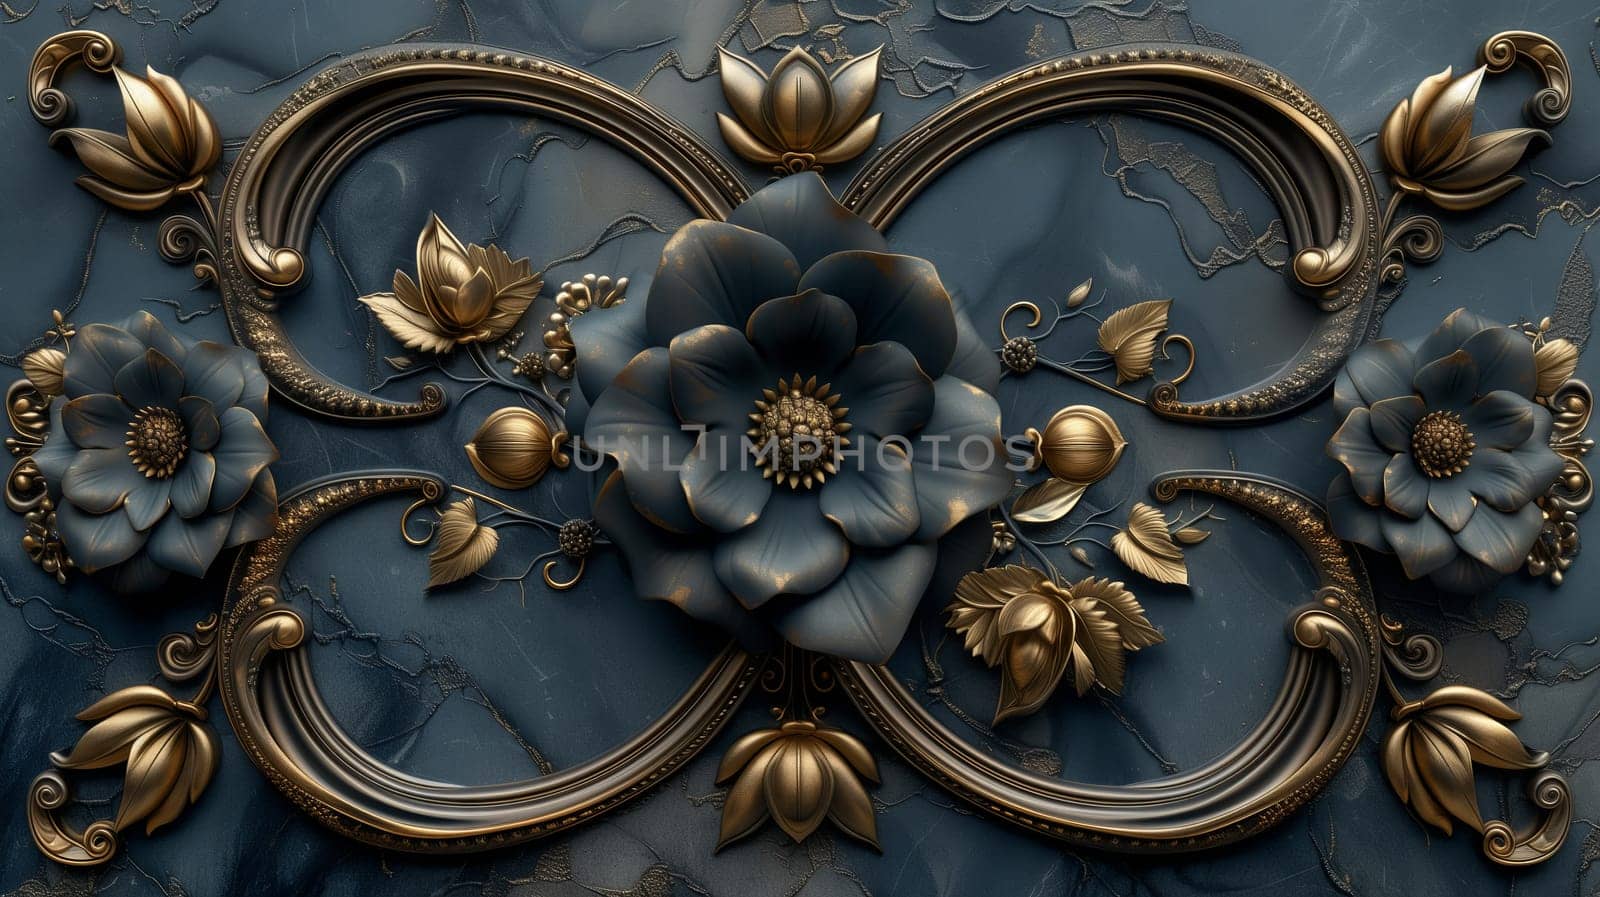 A close up of a symmetrical blue and gold floral pattern fixture on a bronze wall, inspired by natural materials. It resembles a fashion accessory and is the centerpiece of the rooms design